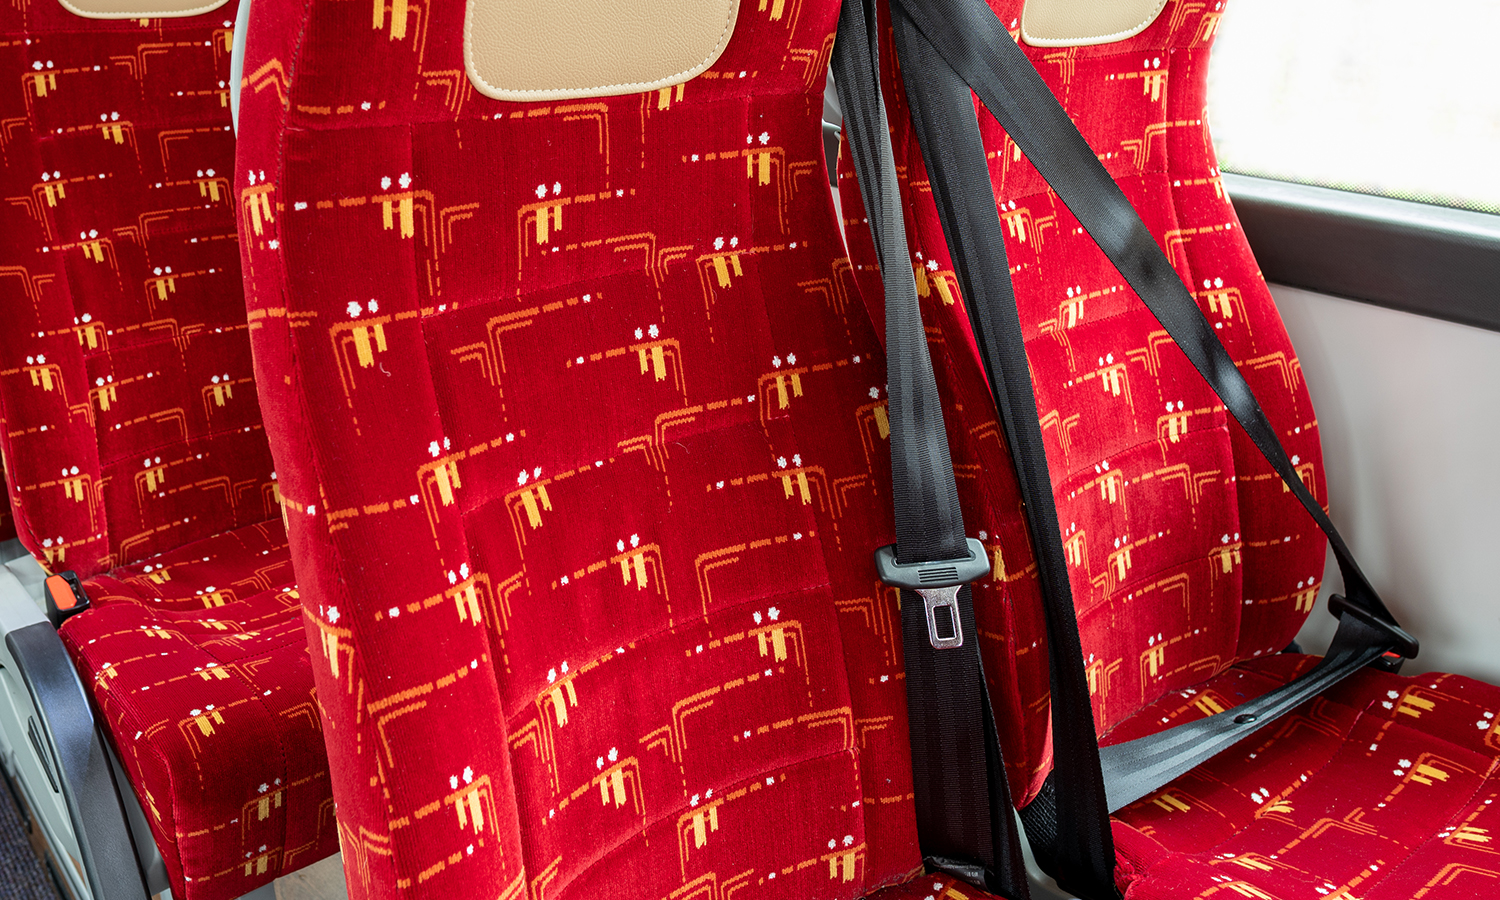 All seats carry a Personal Seat Belt